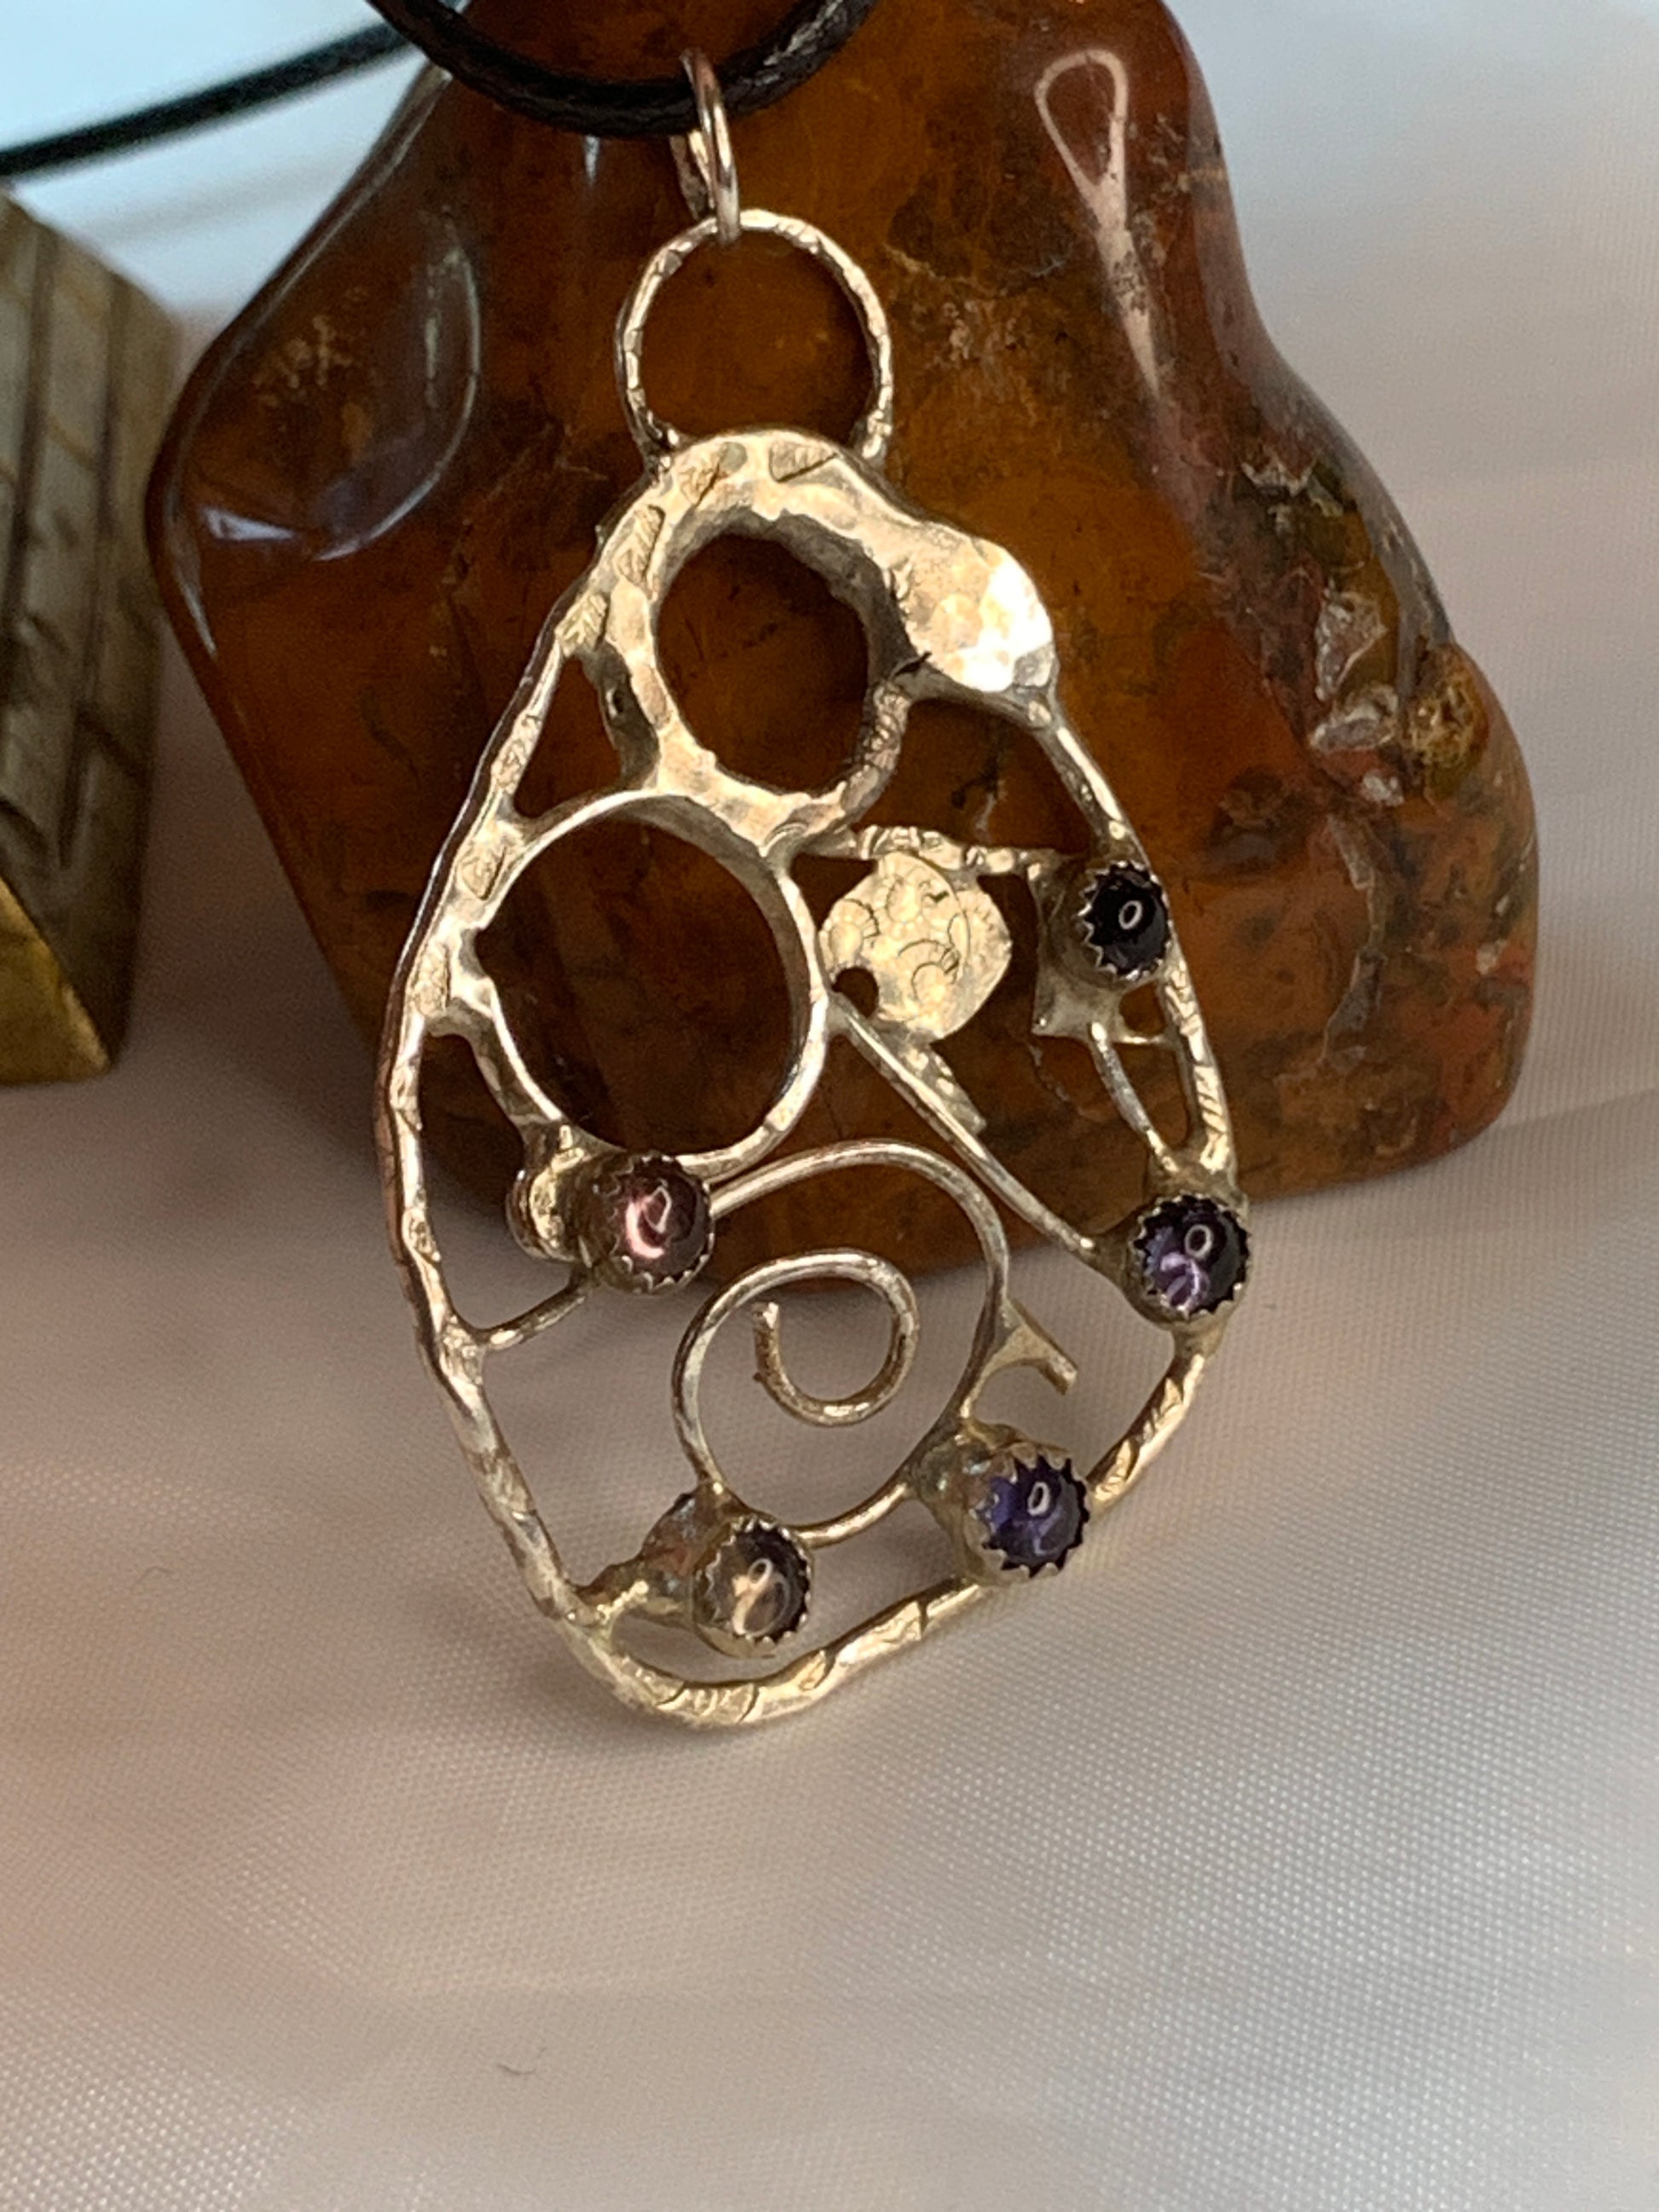 Nestled within this intricate framework are Tourmaline and Iolite gemstones, each radiating their unique energies. Tourmaline symbolizes creativity, protection, and balance, while Iolite represents inner vision and self-expression.